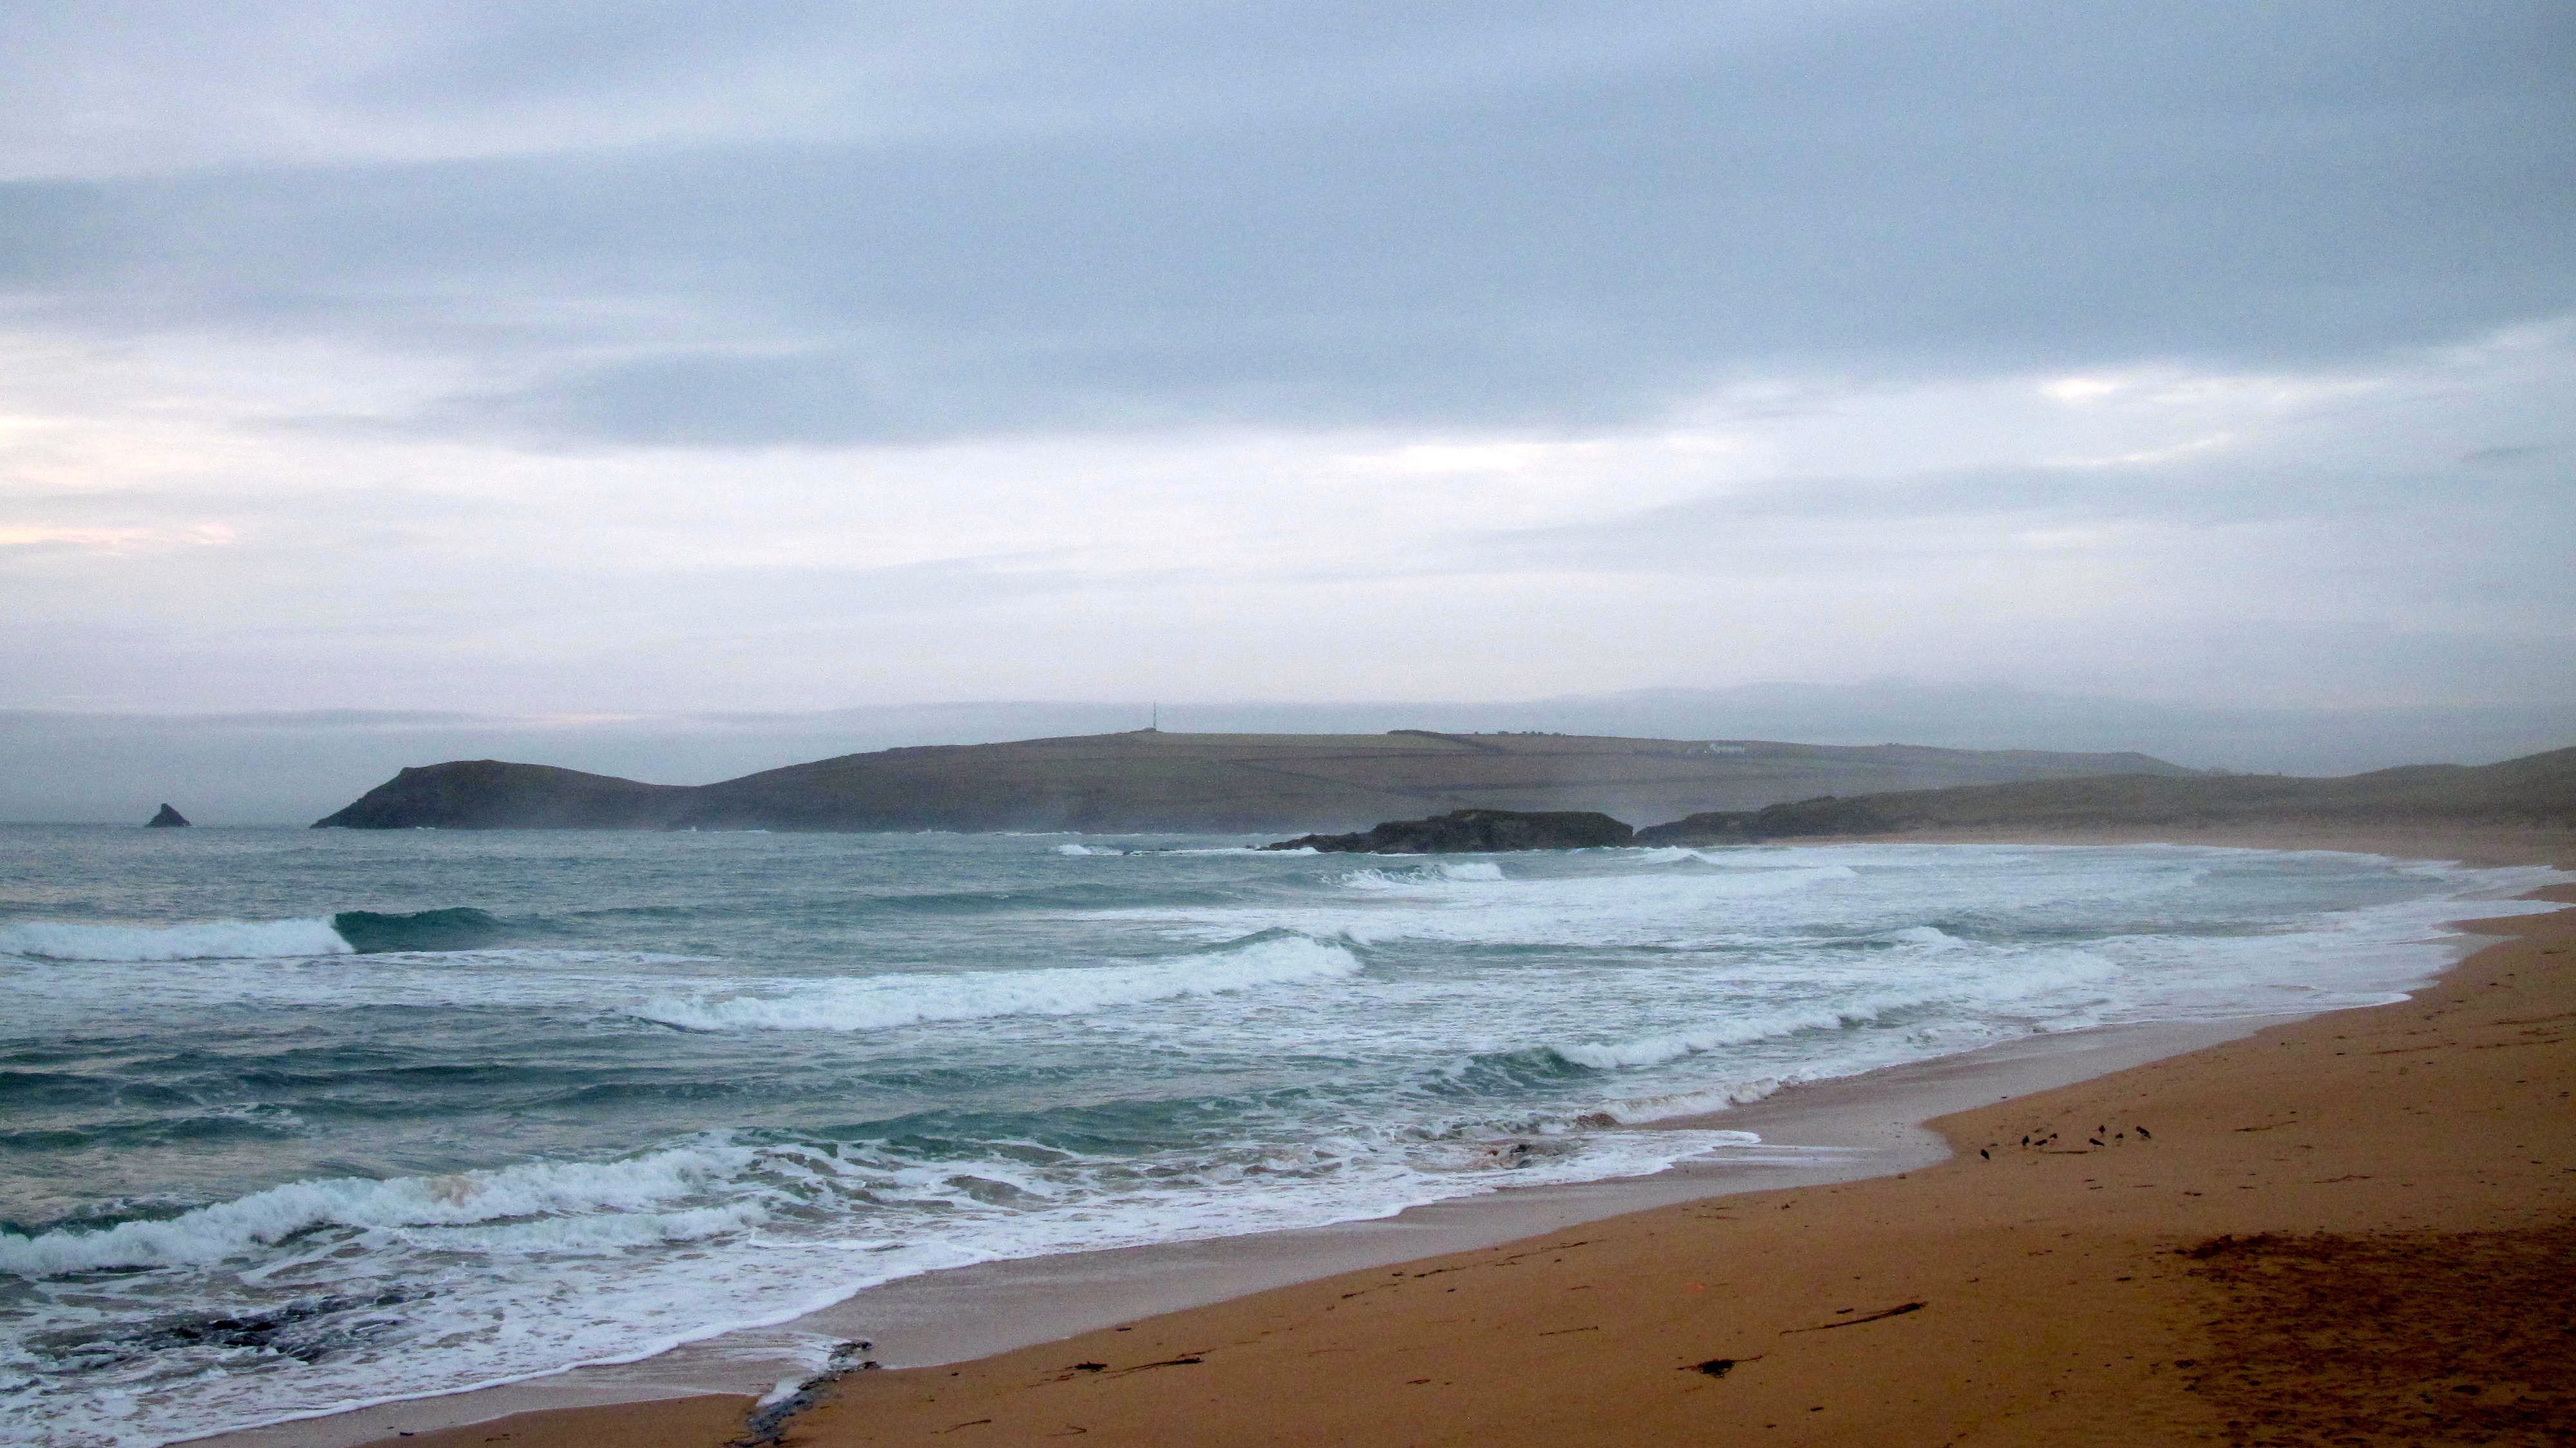 Surf Report for Wednesday 29th October 2014